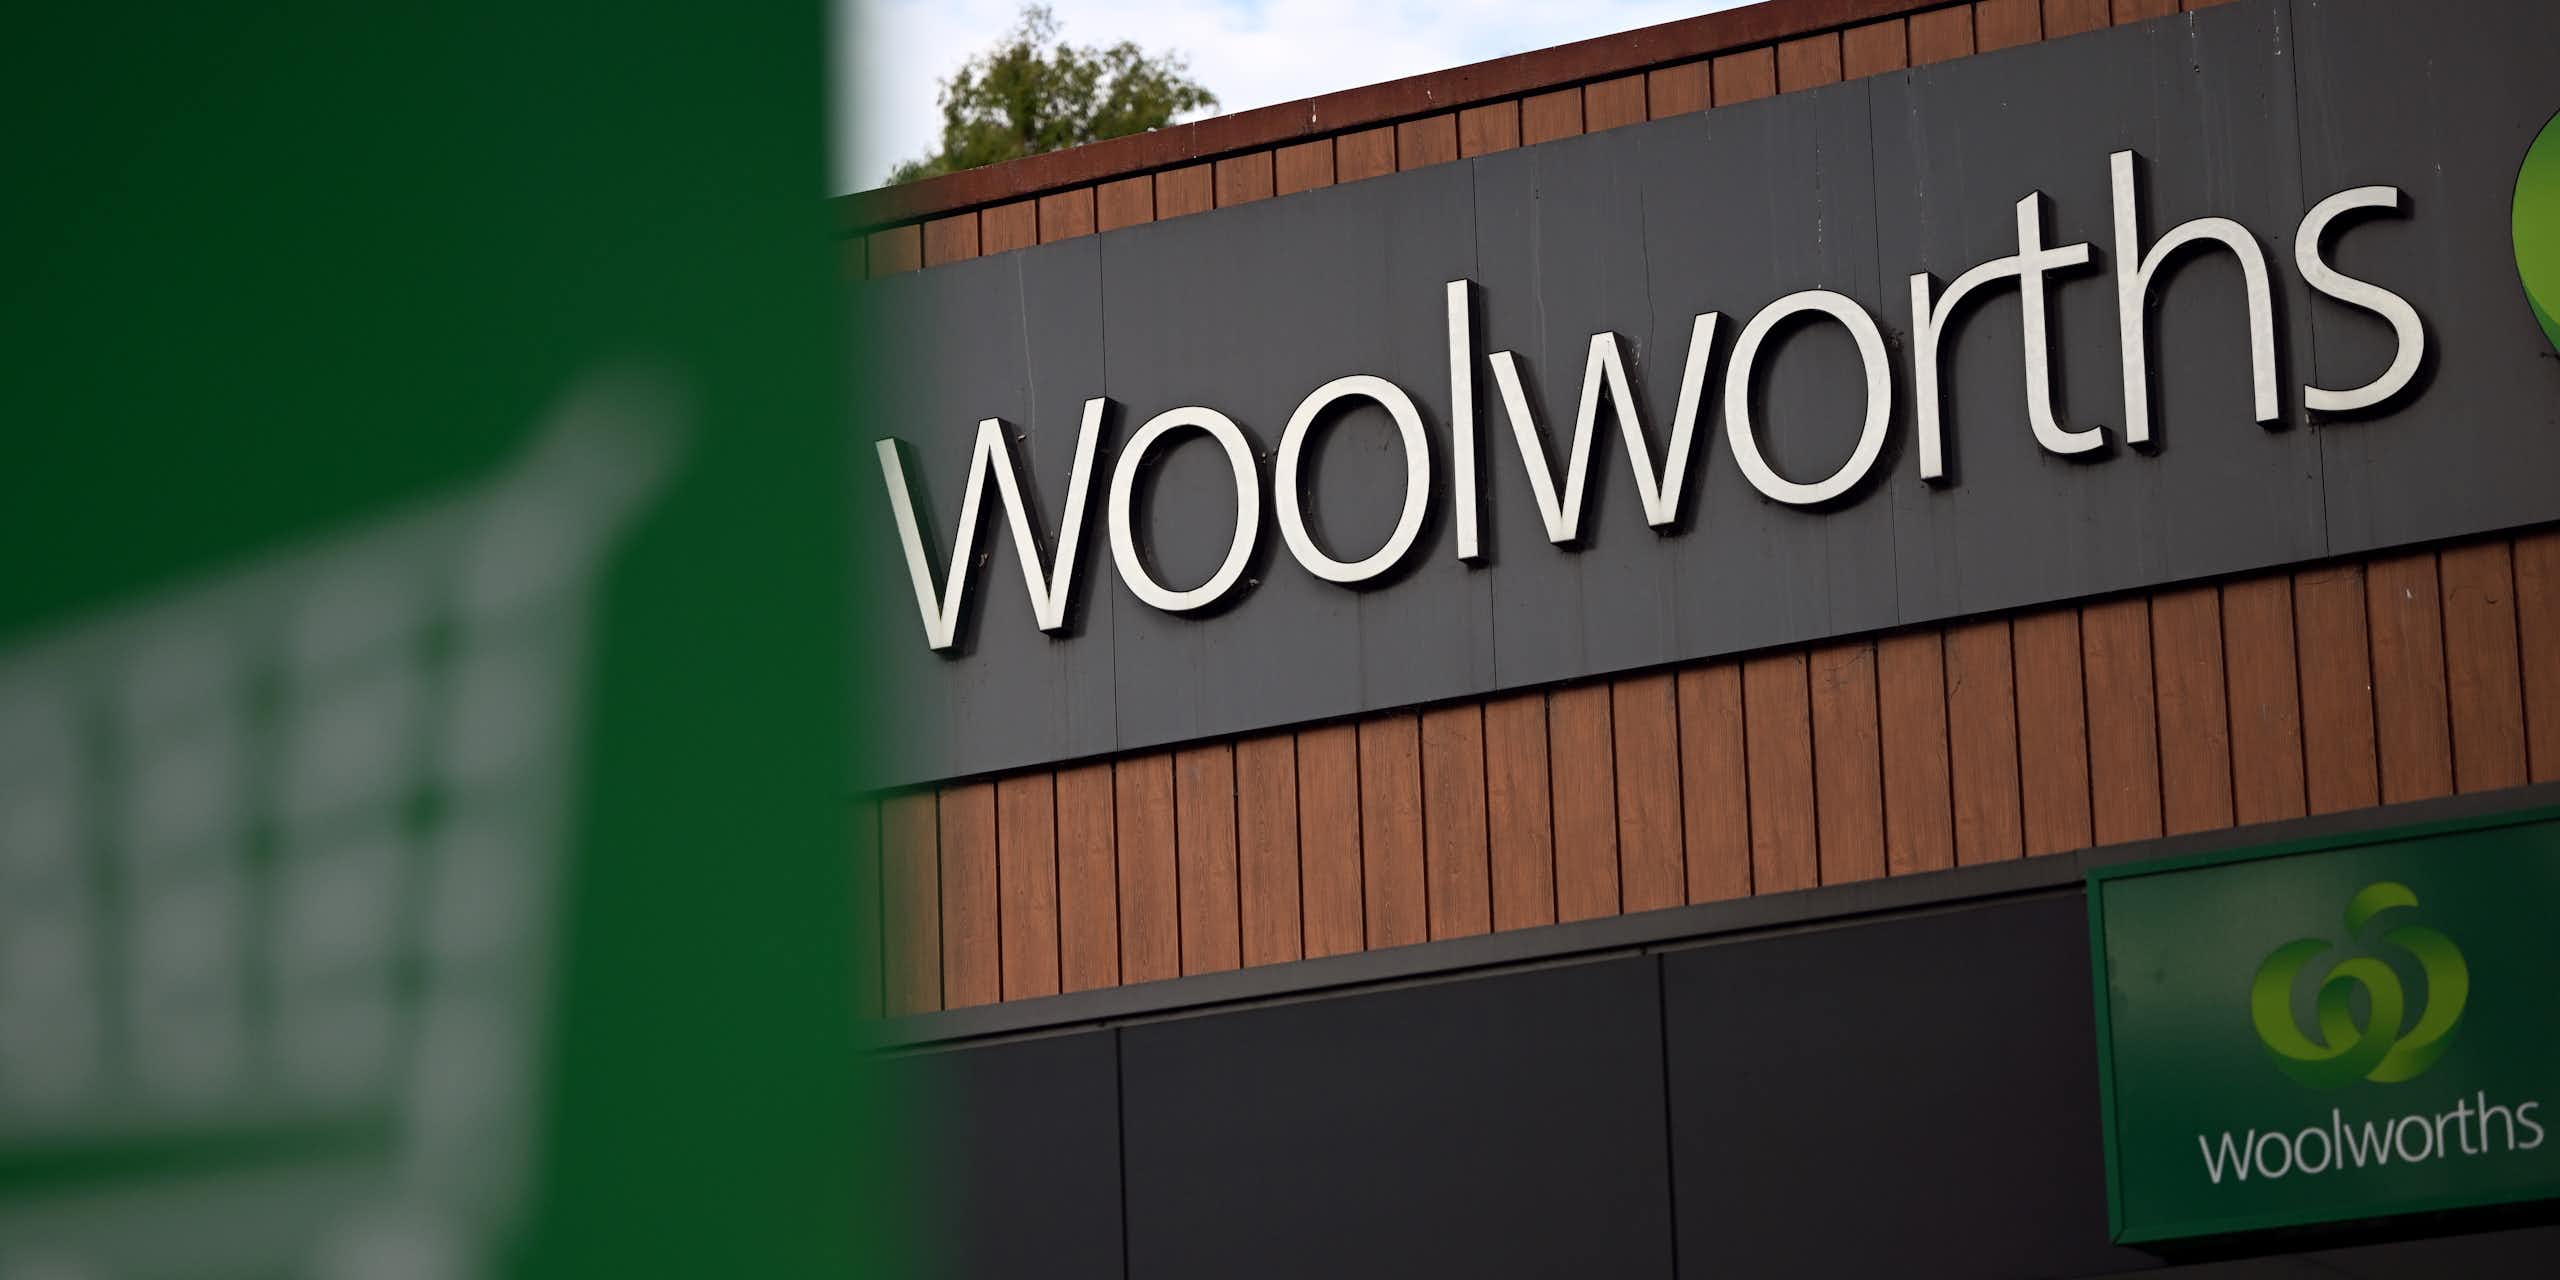 Woolworths storefront signage